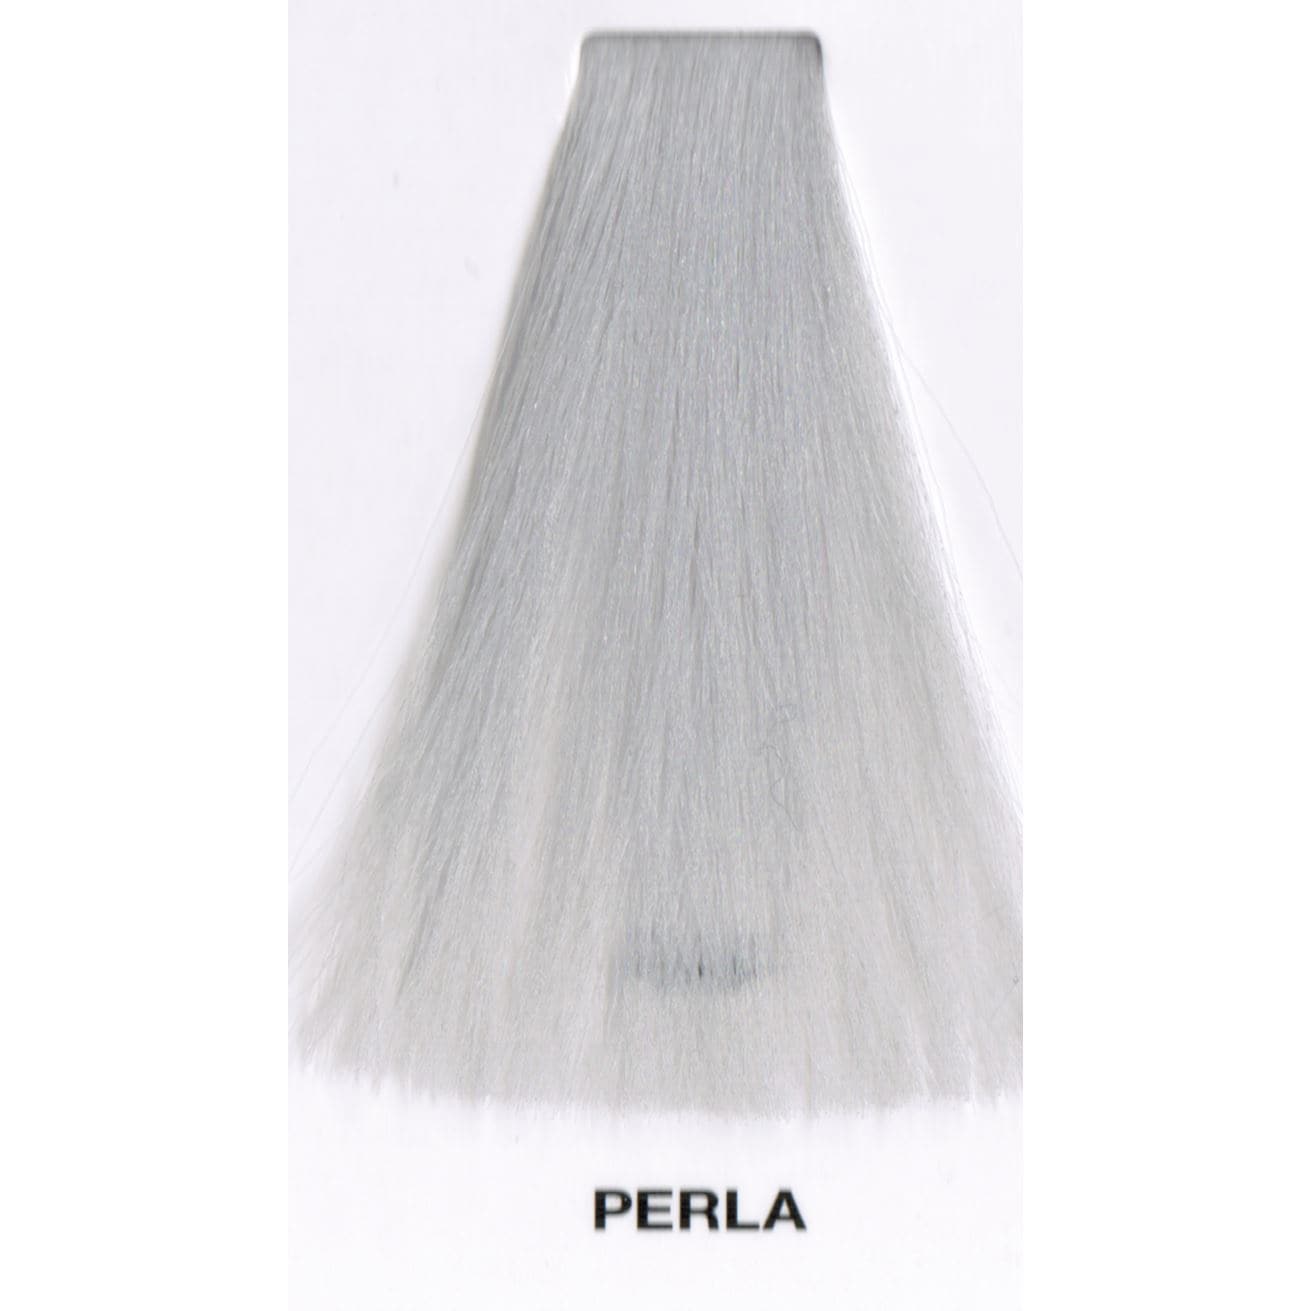 PERLA | Purity | Ammonia-Free Permanent Hair Color HAIR COLOR OYSTER 